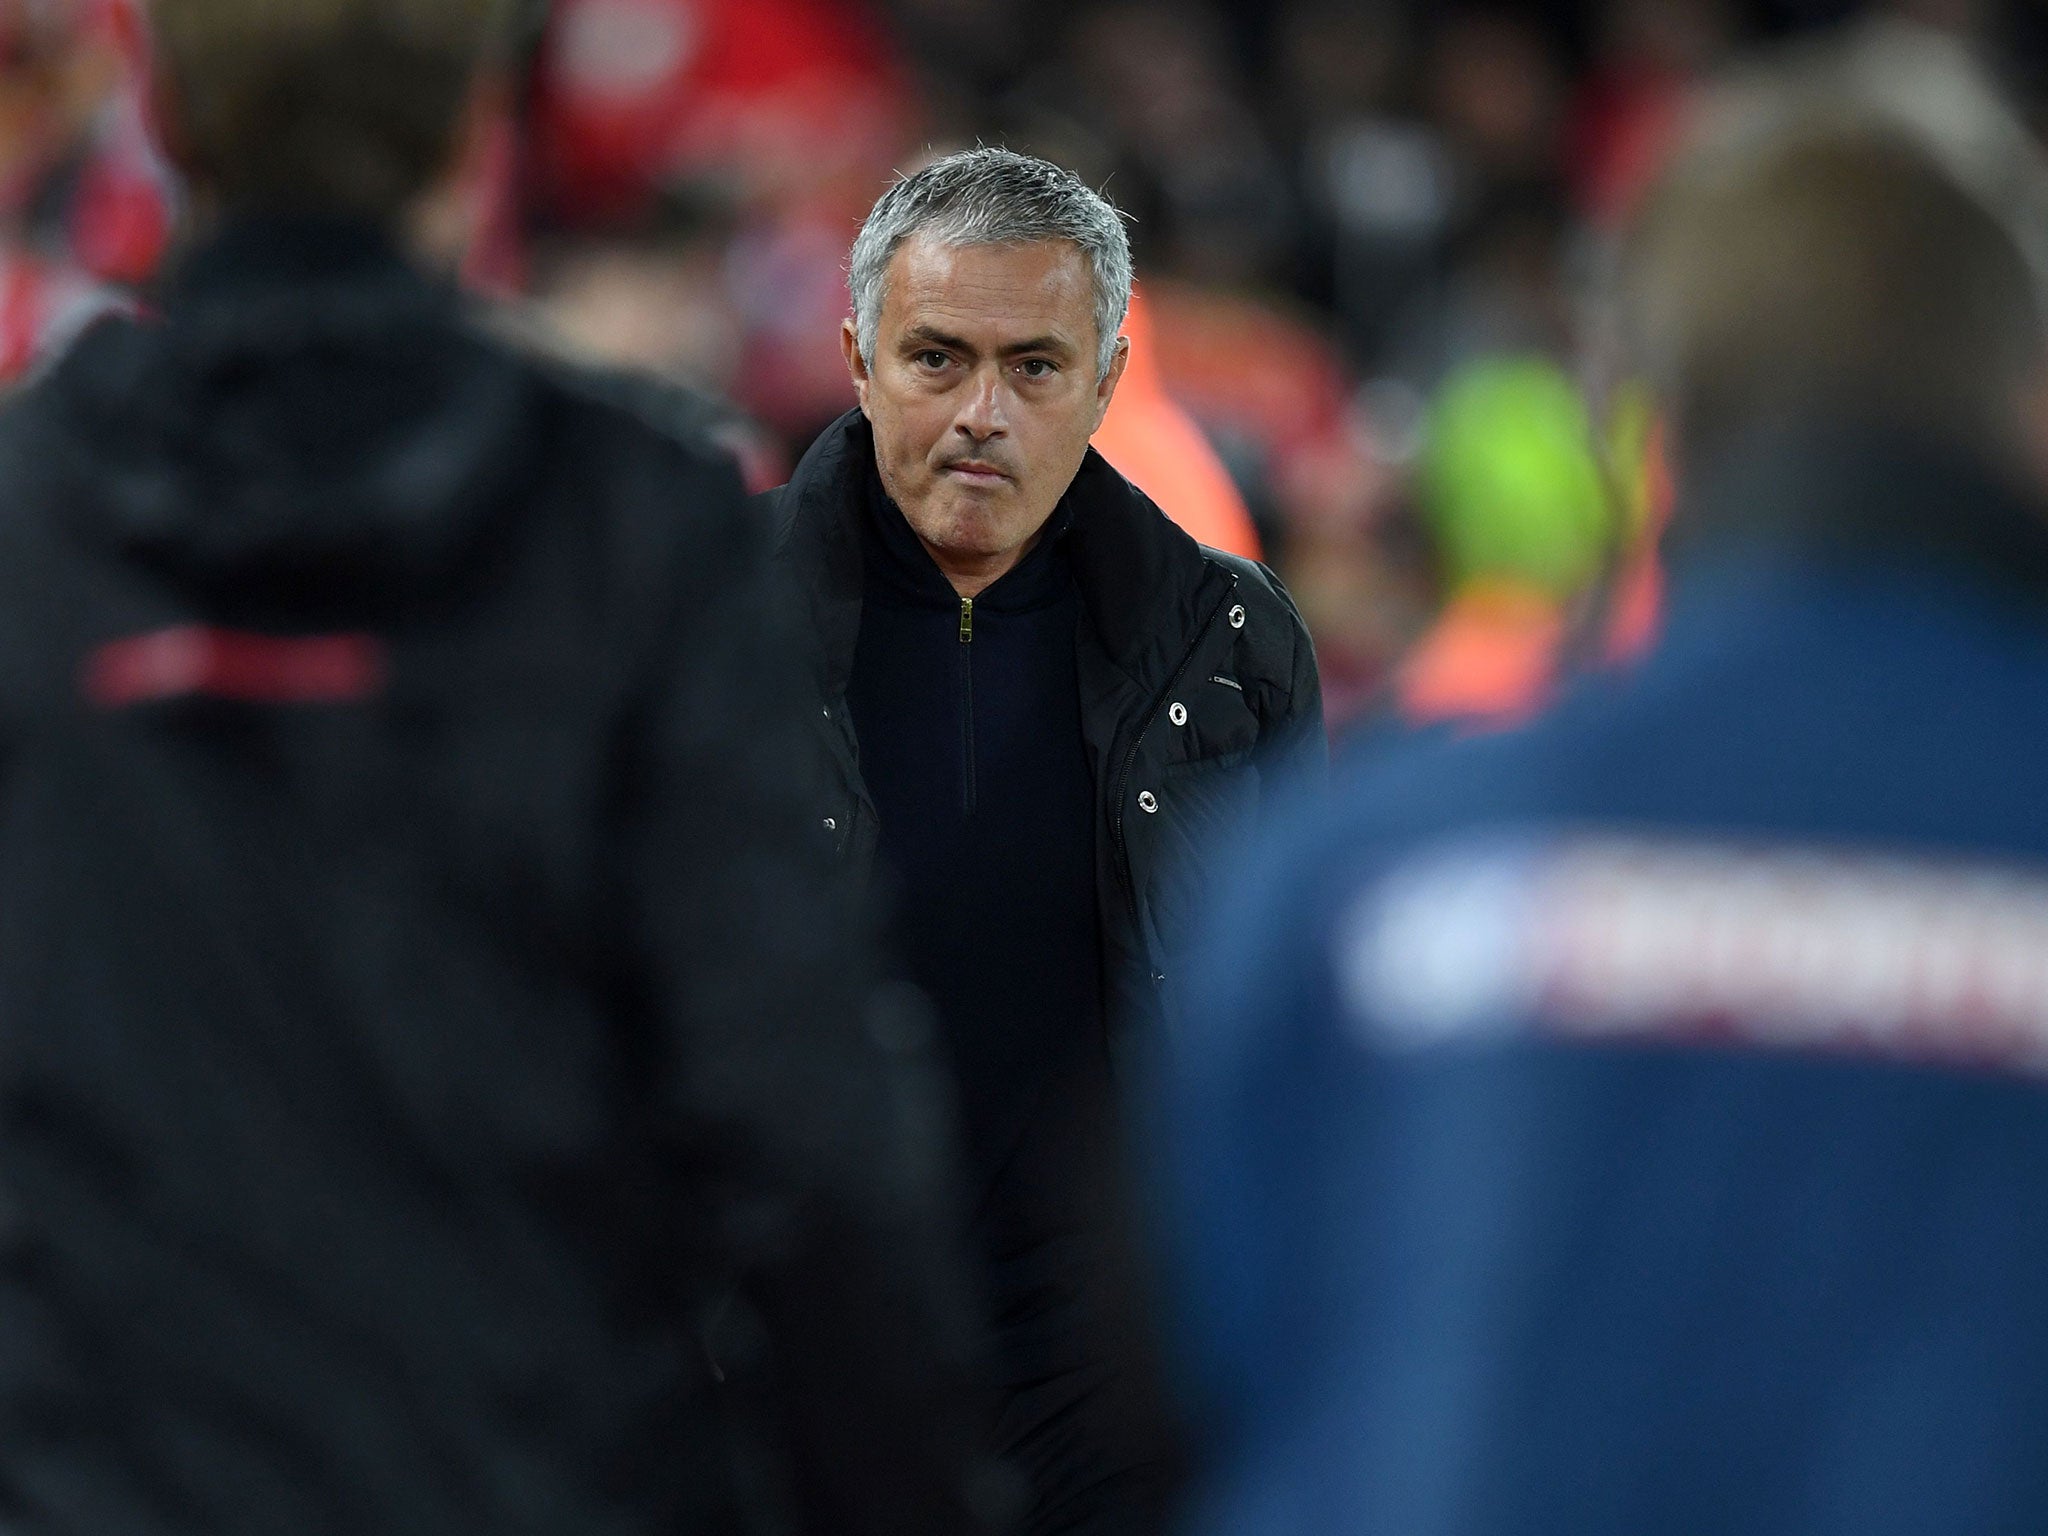 Mourinho's defensive tactical plan served United well on Monday night